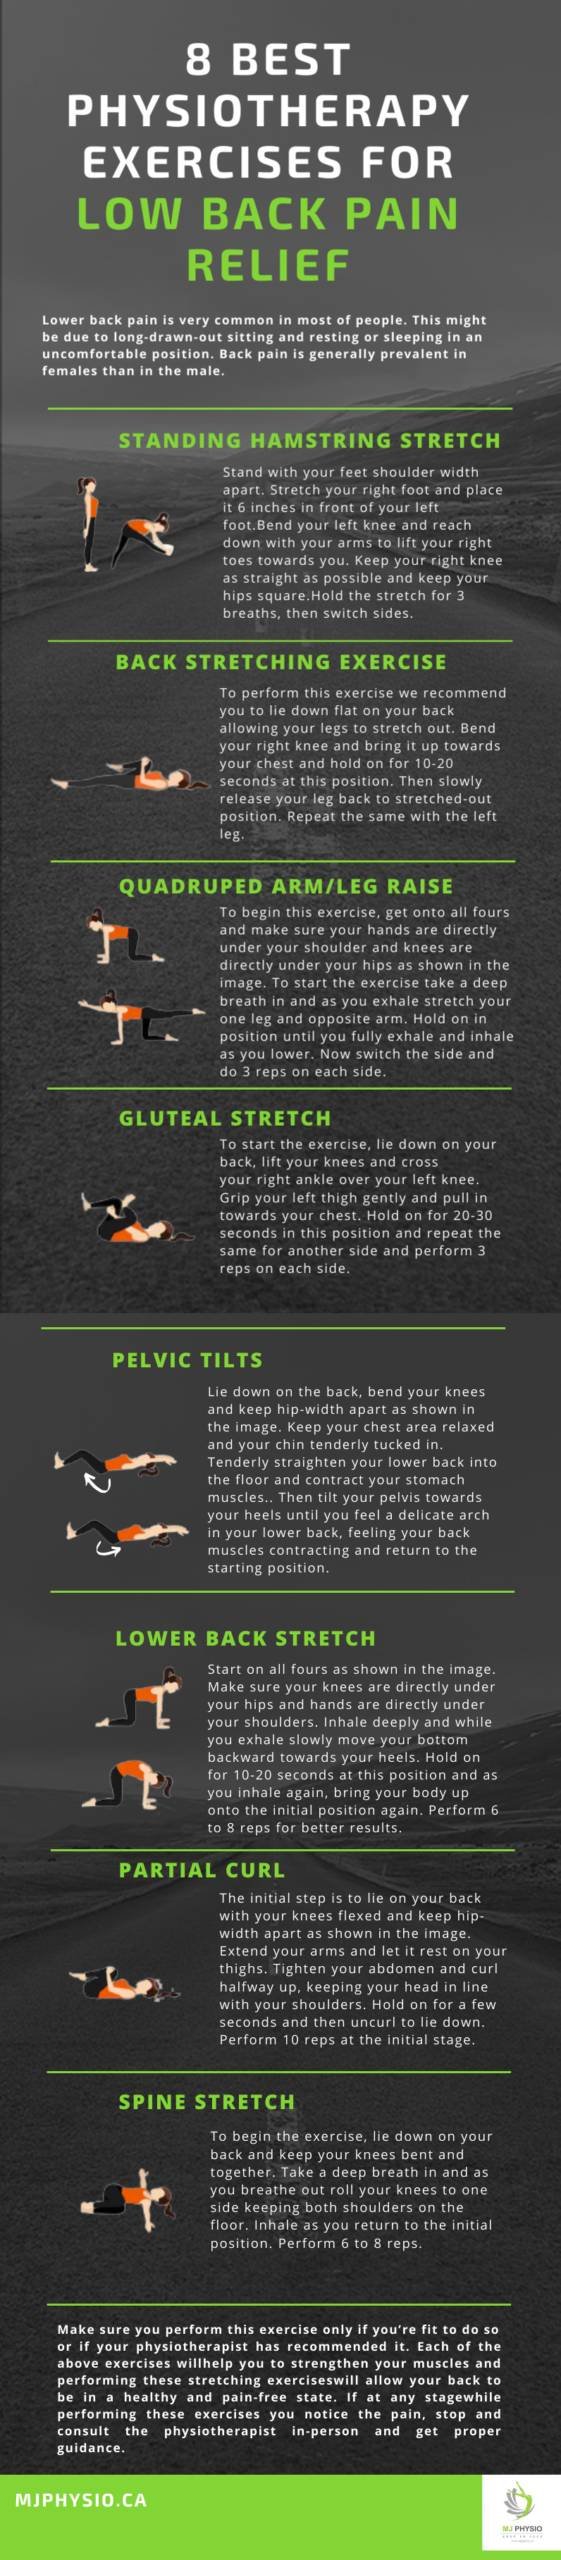 Physiotherapy Exercises for Lower Back Pain